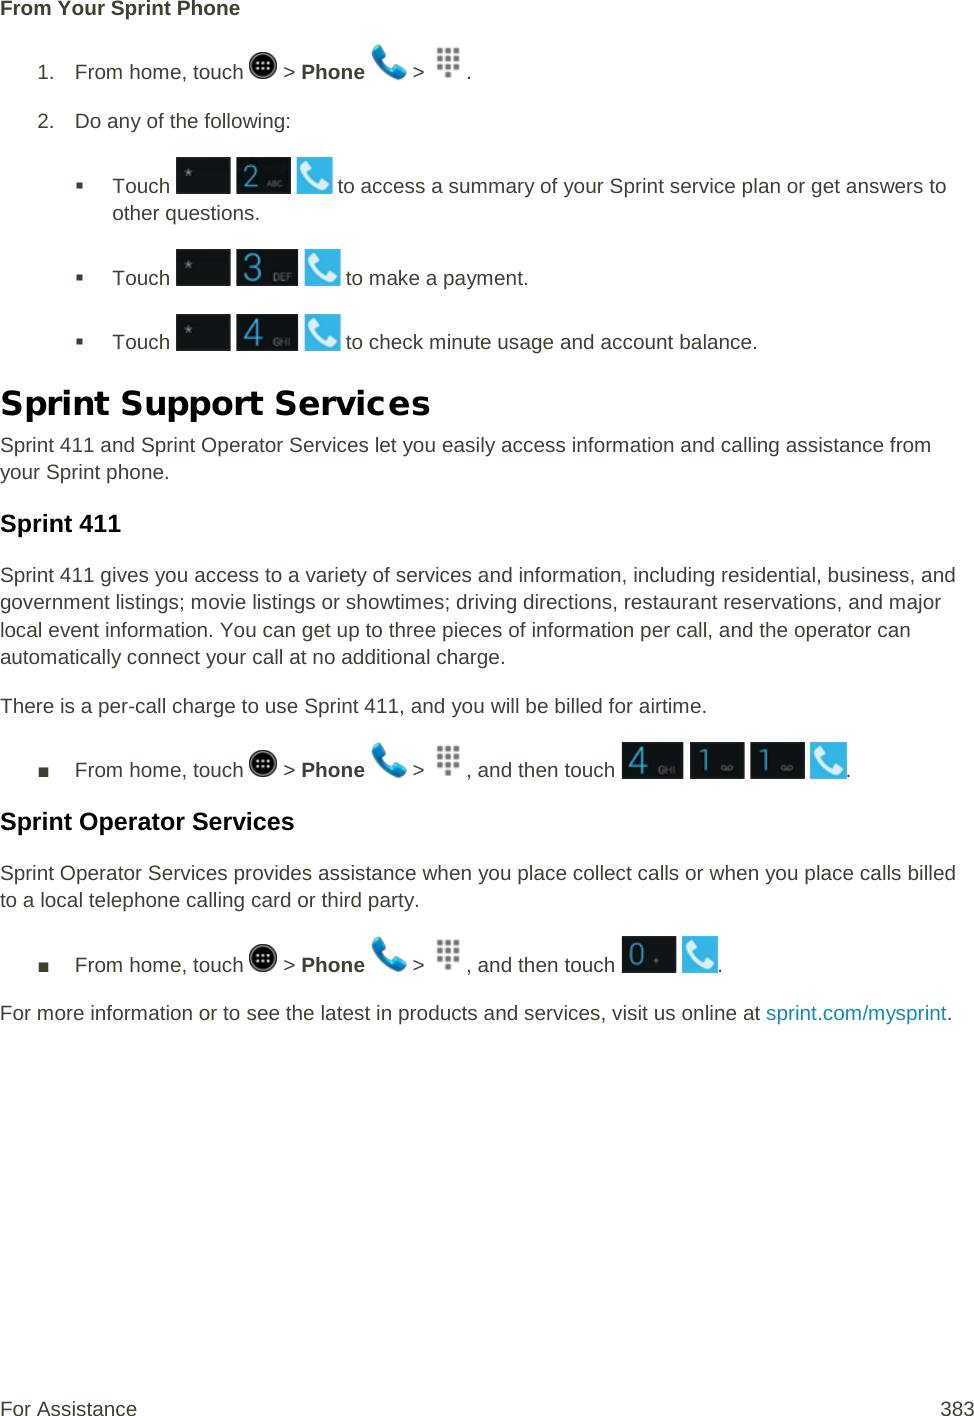 From Your Sprint Phone 1.  From home, touch   &gt; Phone   &gt;  . 2. Do any of the following:  Touch       to access a summary of your Sprint service plan or get answers to other questions.  Touch       to make a payment.  Touch       to check minute usage and account balance. Sprint Support Services Sprint 411 and Sprint Operator Services let you easily access information and calling assistance from your Sprint phone. Sprint 411 Sprint 411 gives you access to a variety of services and information, including residential, business, and government listings; movie listings or showtimes; driving directions, restaurant reservations, and major local event information. You can get up to three pieces of information per call, and the operator can automatically connect your call at no additional charge. There is a per-call charge to use Sprint 411, and you will be billed for airtime. ■ From home, touch   &gt; Phone   &gt;  , and then touch        .  Sprint Operator Services Sprint Operator Services provides assistance when you place collect calls or when you place calls billed to a local telephone calling card or third party. ■ From home, touch   &gt; Phone   &gt;  , and then touch   .  For more information or to see the latest in products and services, visit us online at sprint.com/mysprint. For Assistance 383 